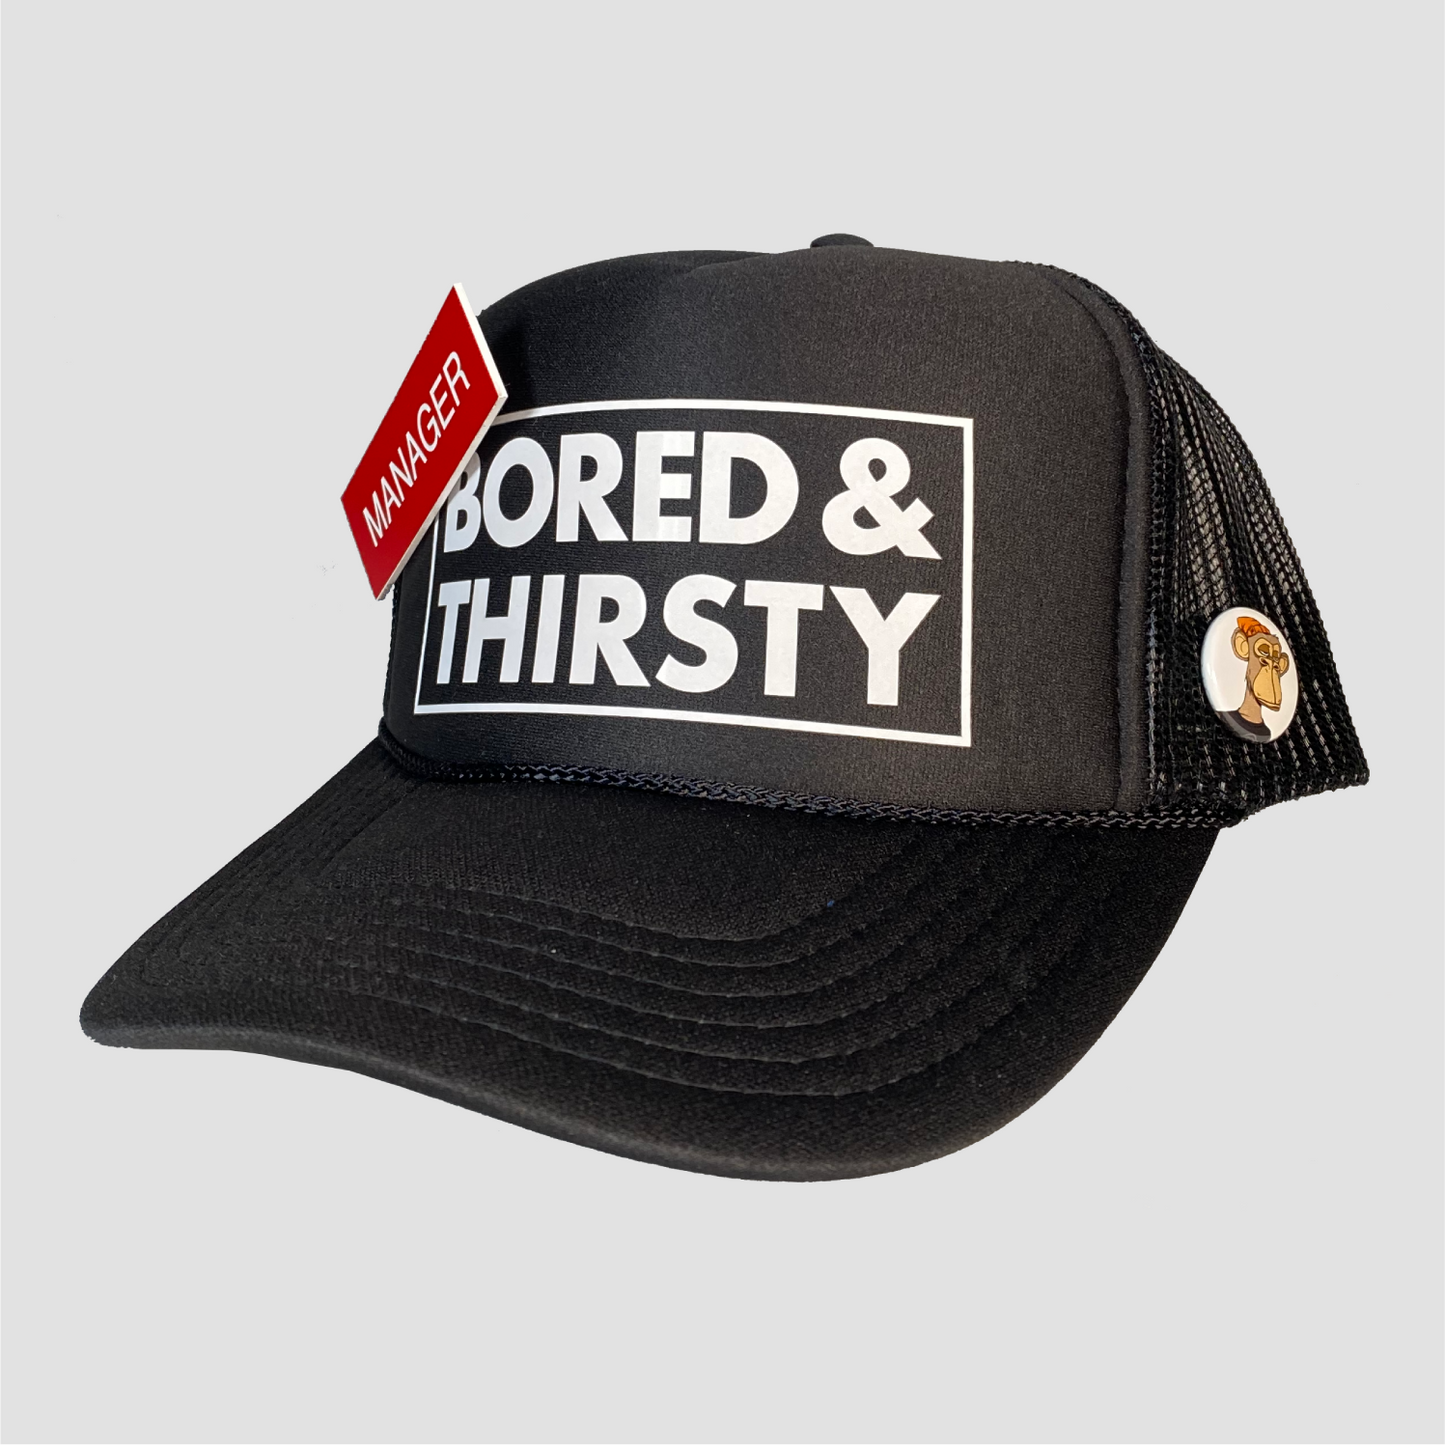 No trucker cap is complete without a Thirstin pin. Wear your custom degen headgear with pride.